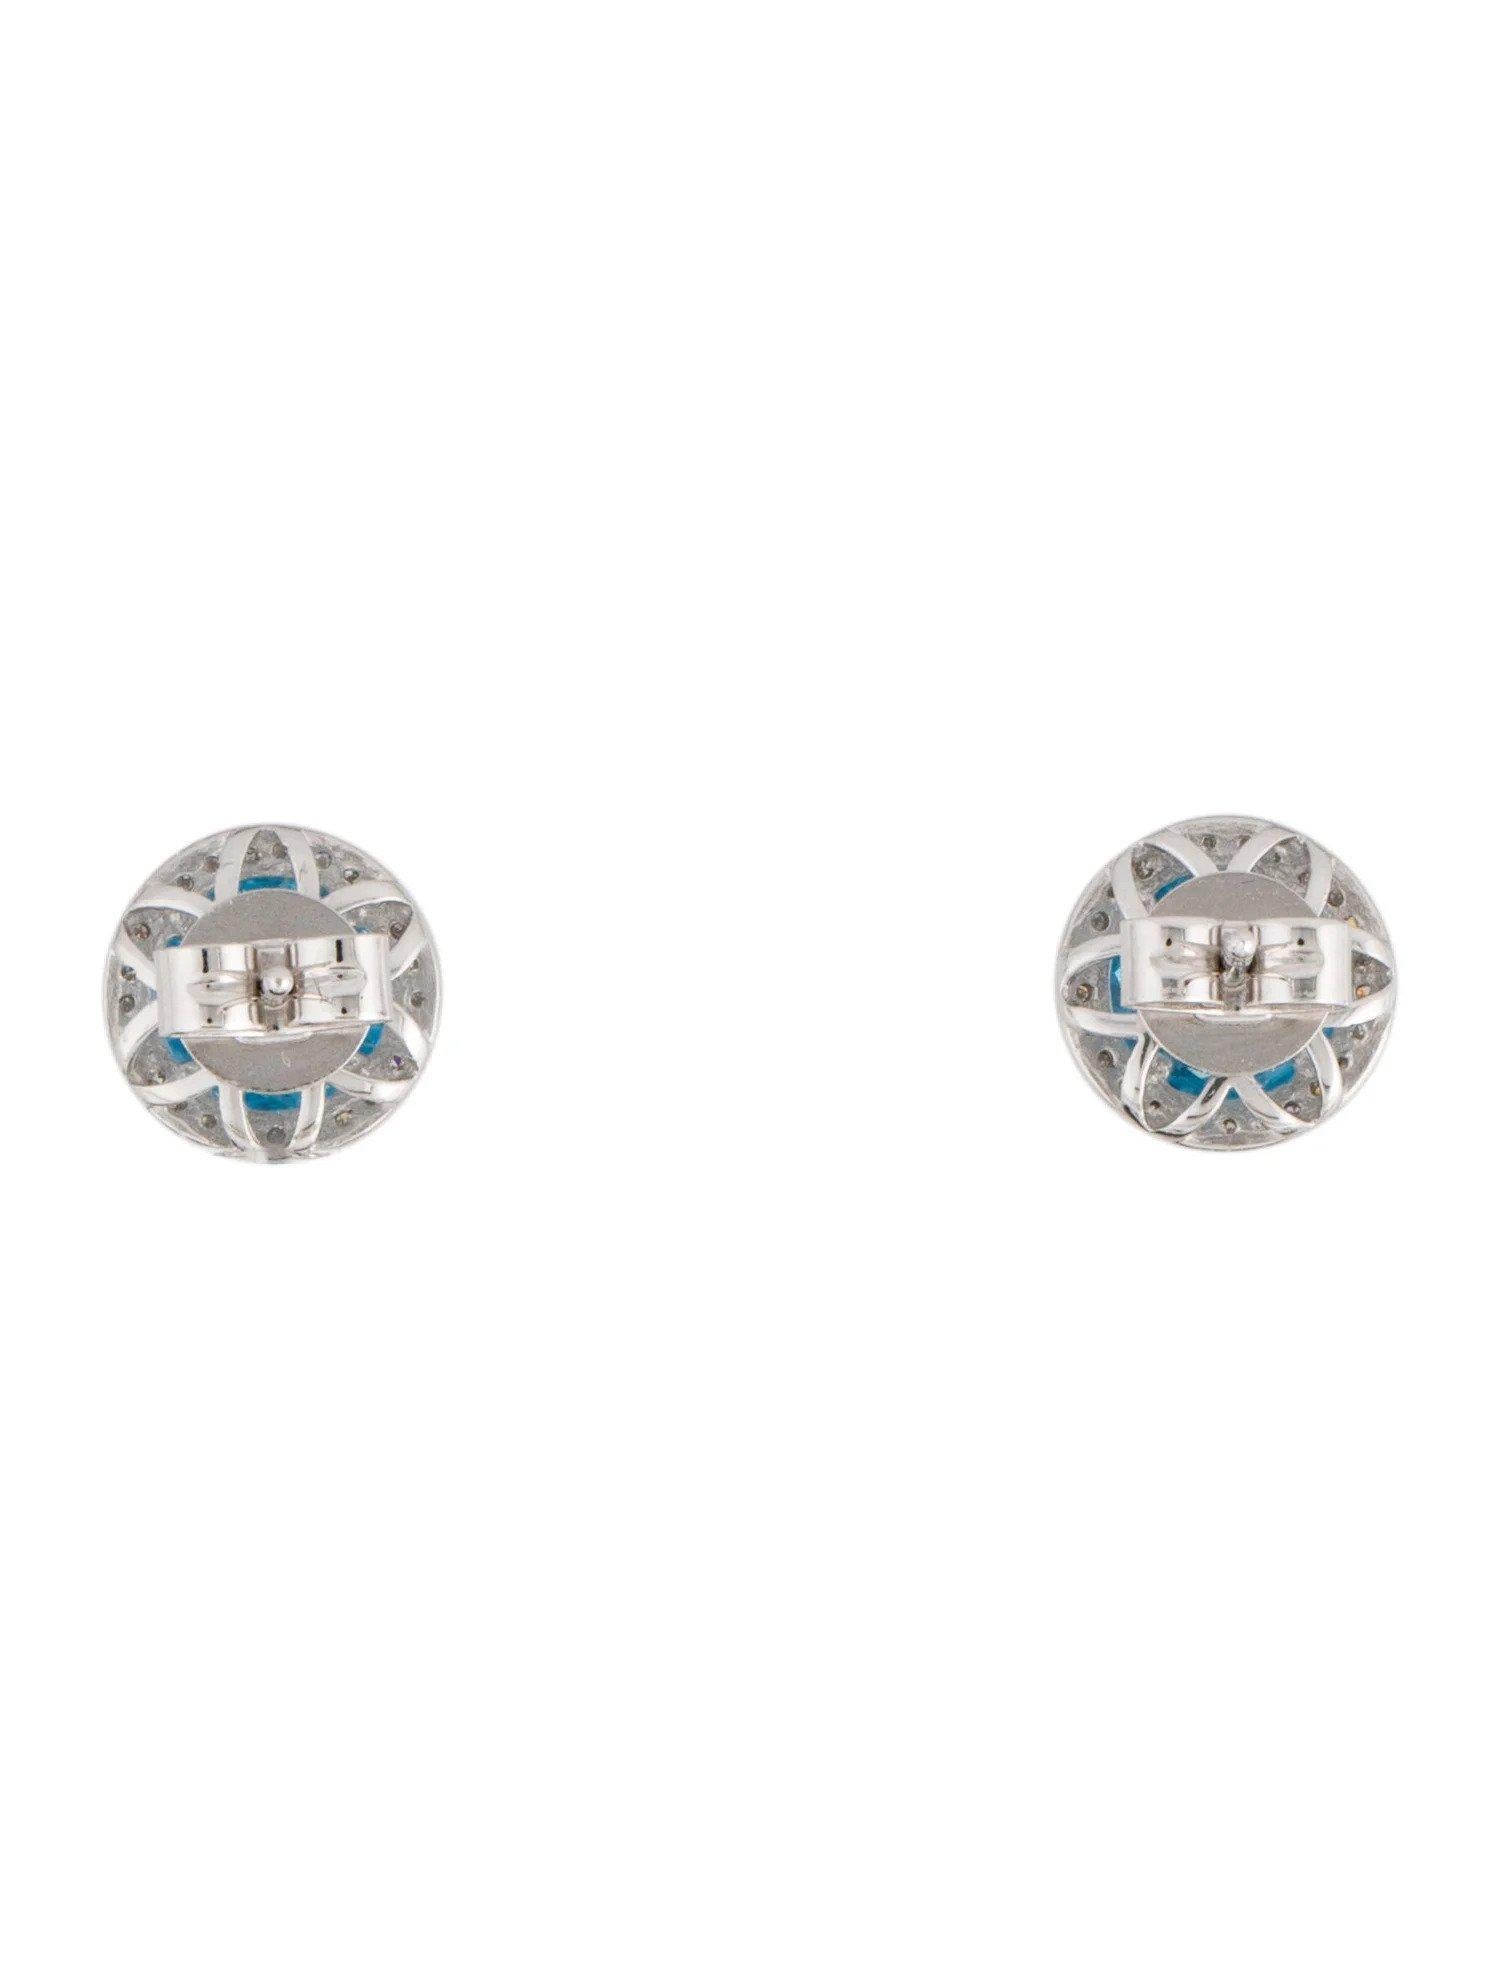 2.39 Carat Round Swiss Blue Topaz & Diamond White Gold Stud Earrings  In New Condition For Sale In Great Neck, NY